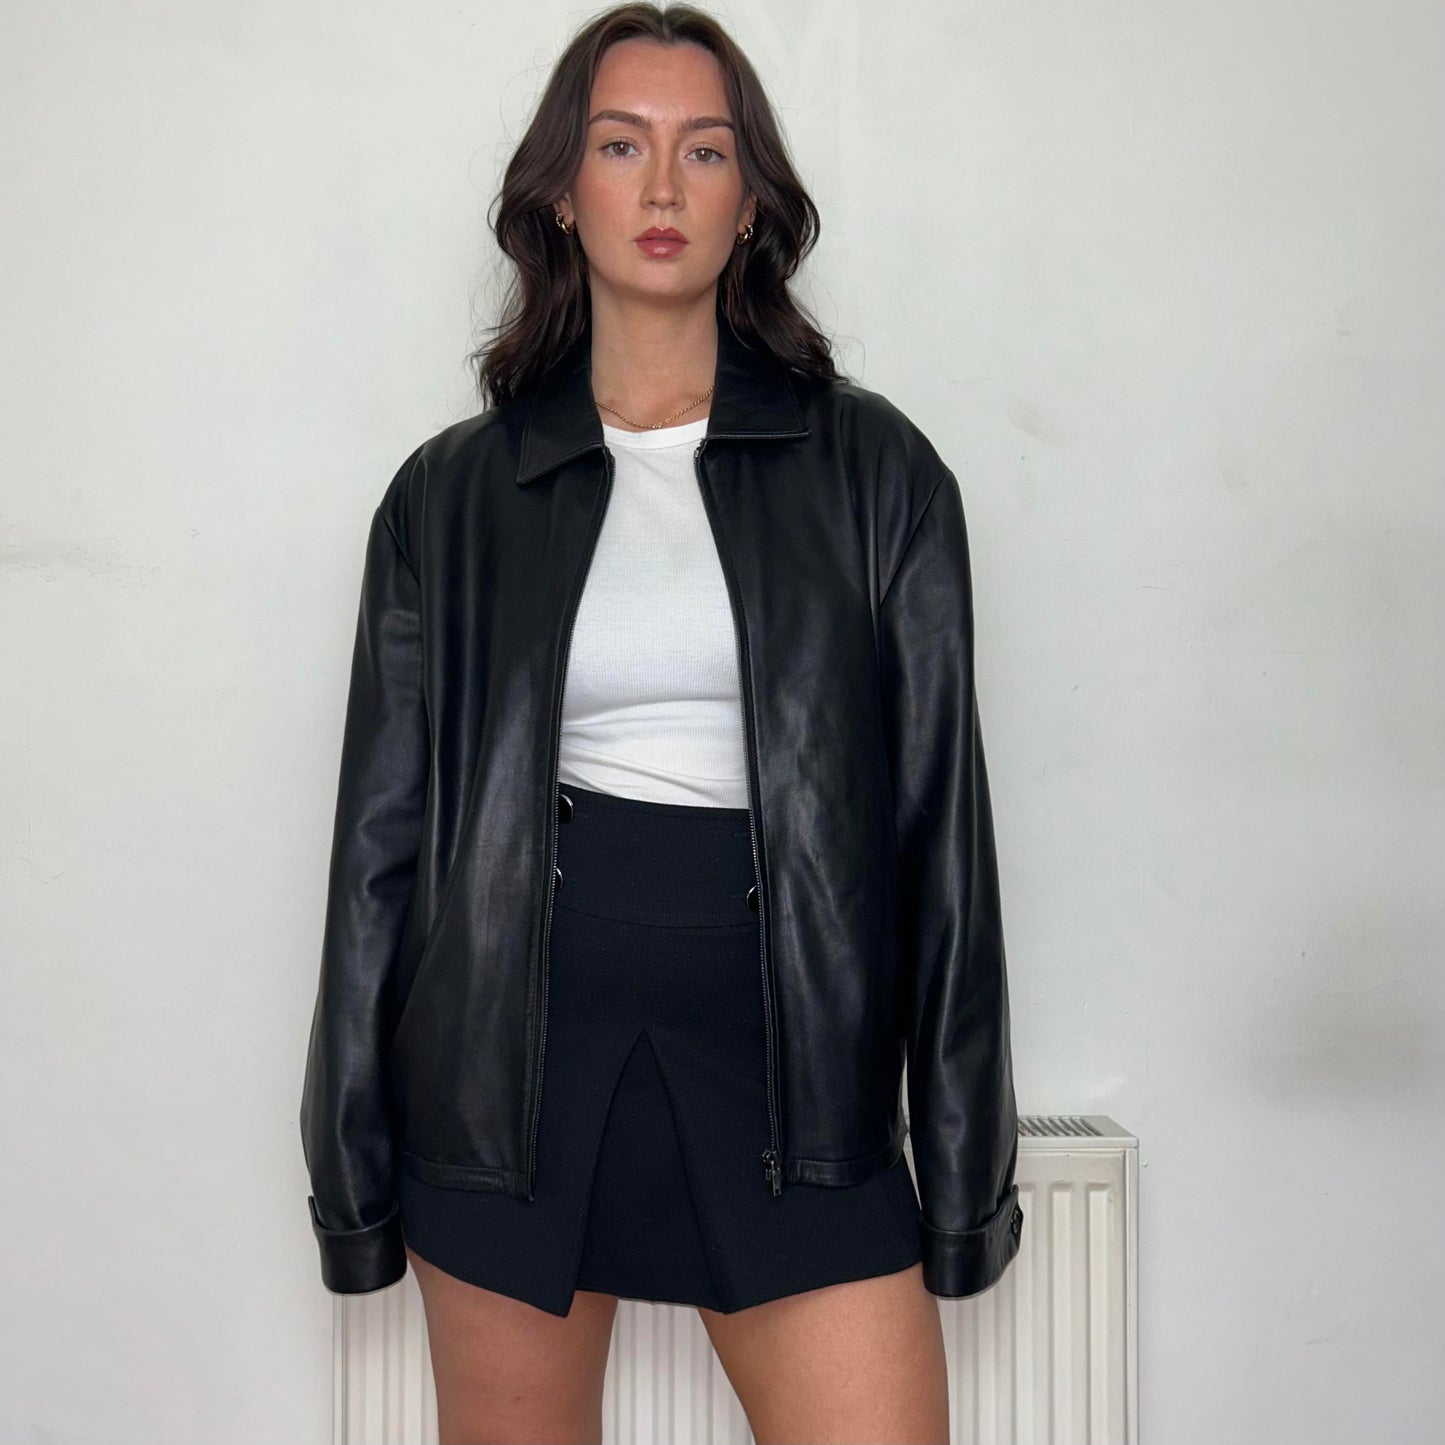 vintage oversized black leather bomber jacket shown  on a  model wearing a white crop top